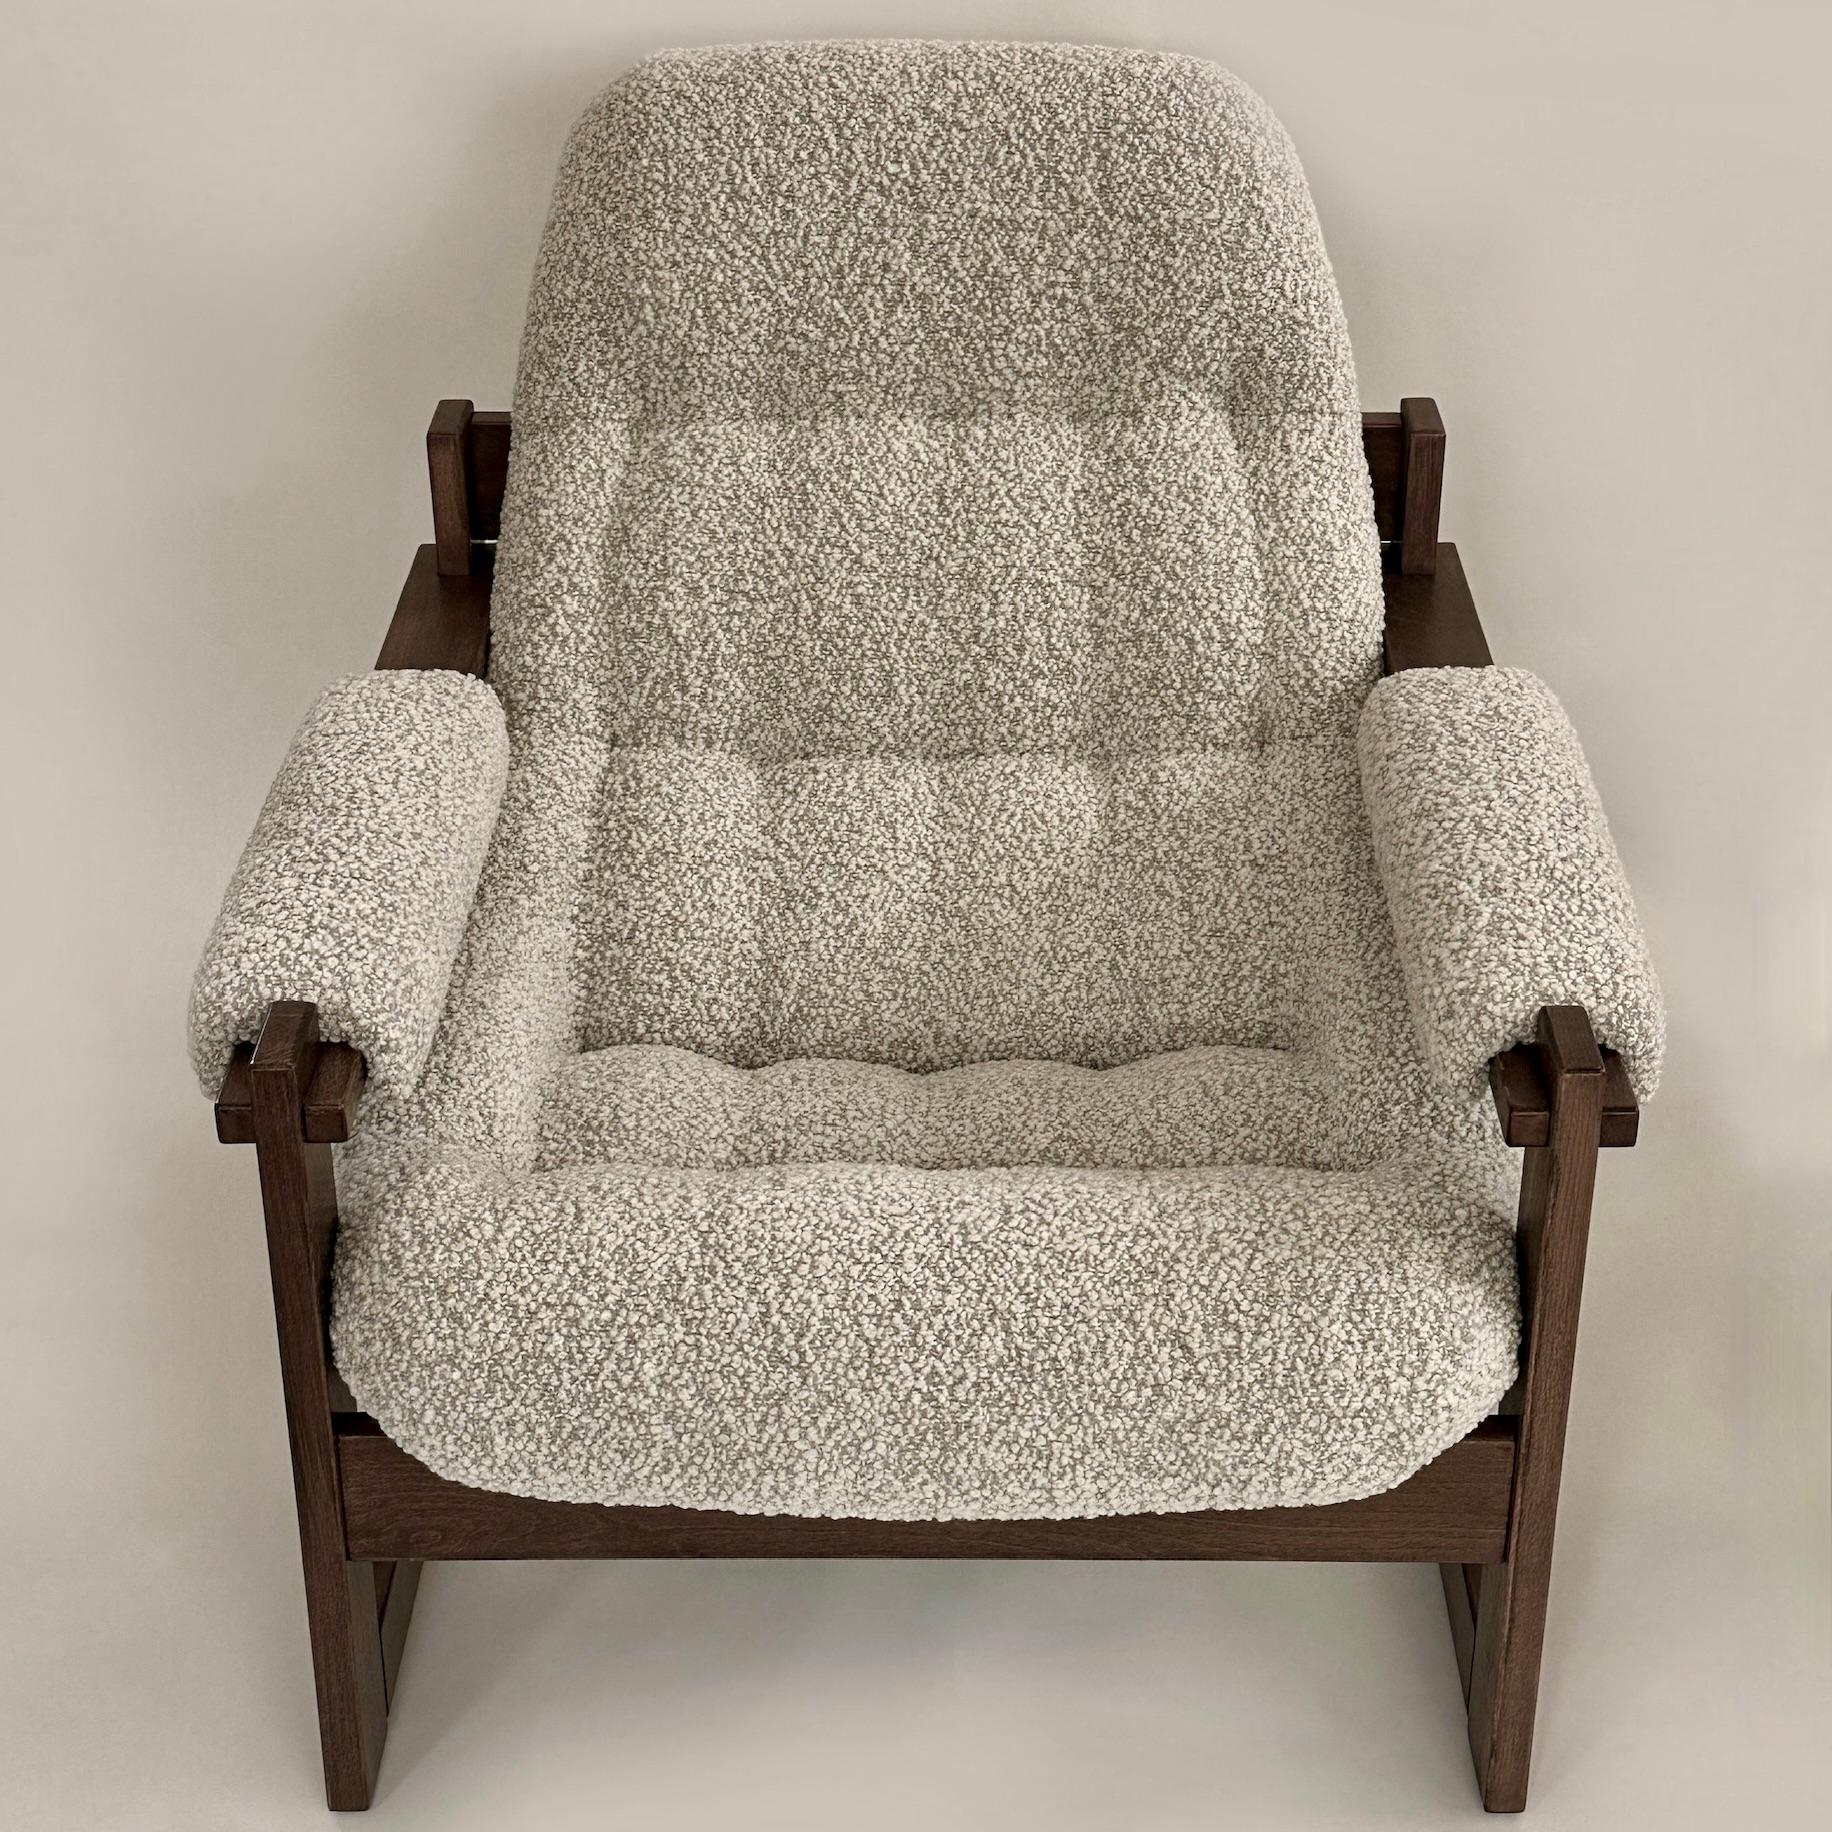 Pair of Brazilian Wood & Beige Wool Bouclè MP-163 Earth Chairs by Percival Lafer For Sale 6